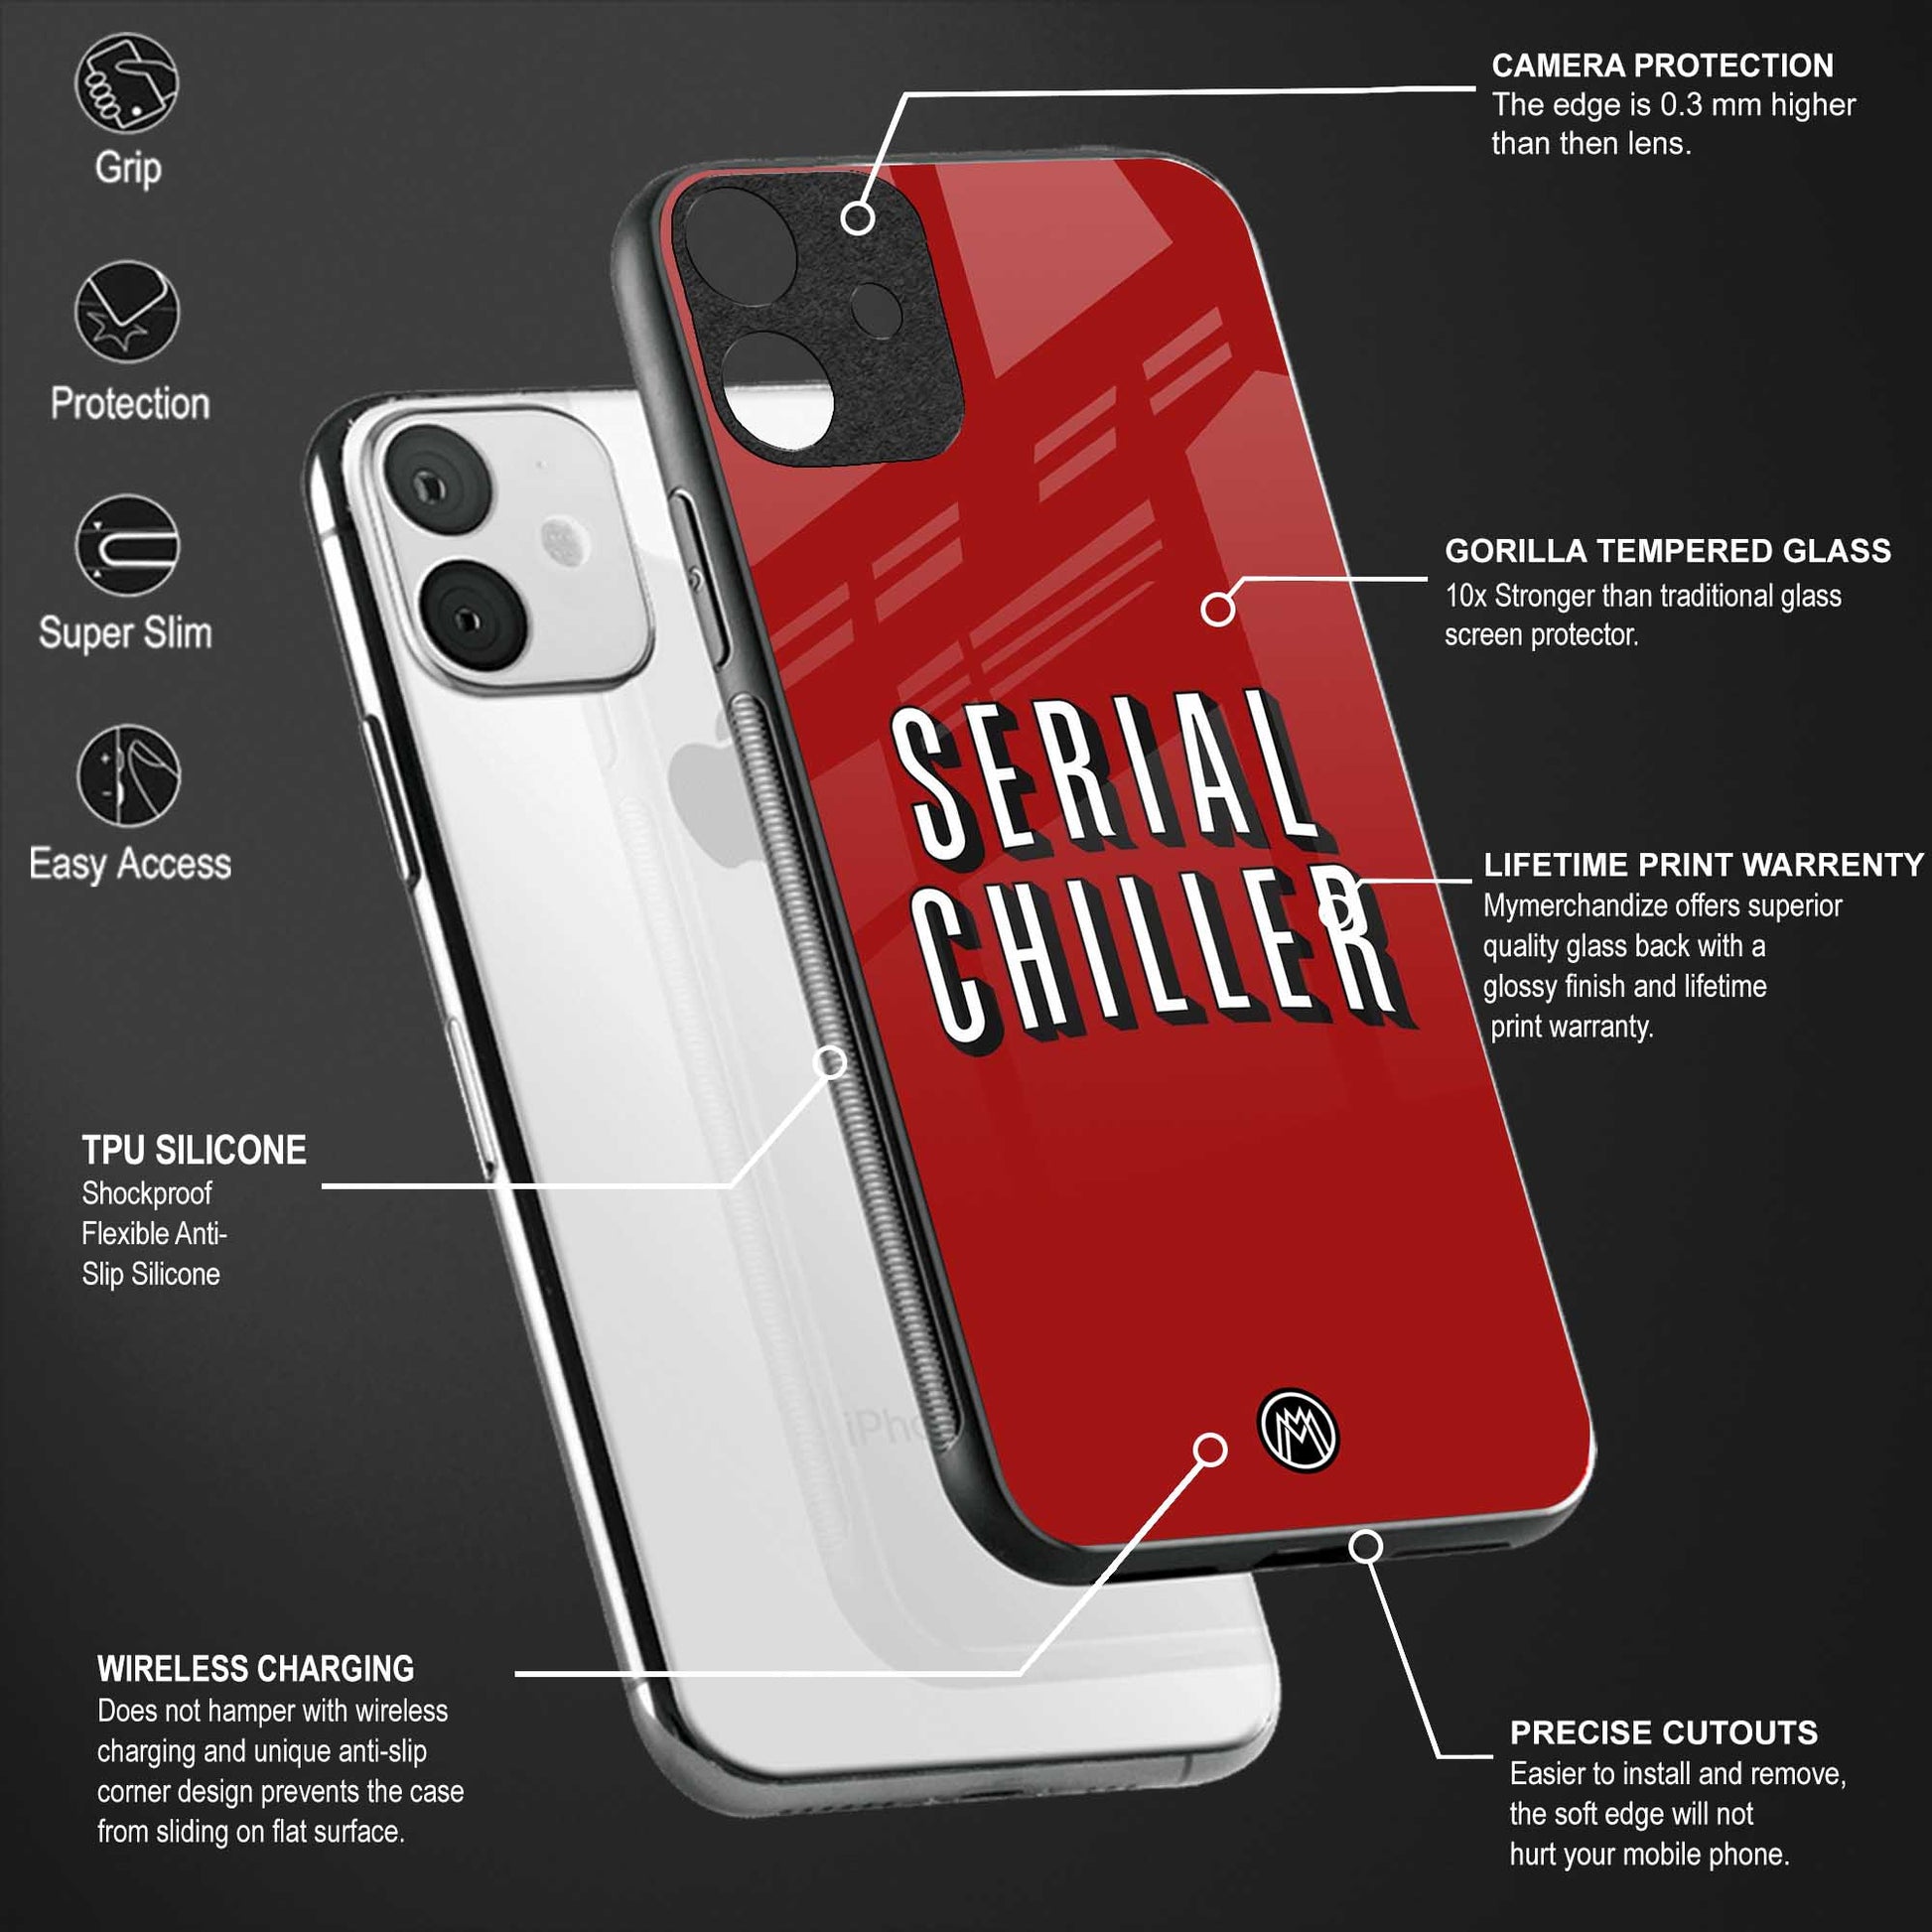 serial chiller netflix glass case for redmi note 7 pro image-4